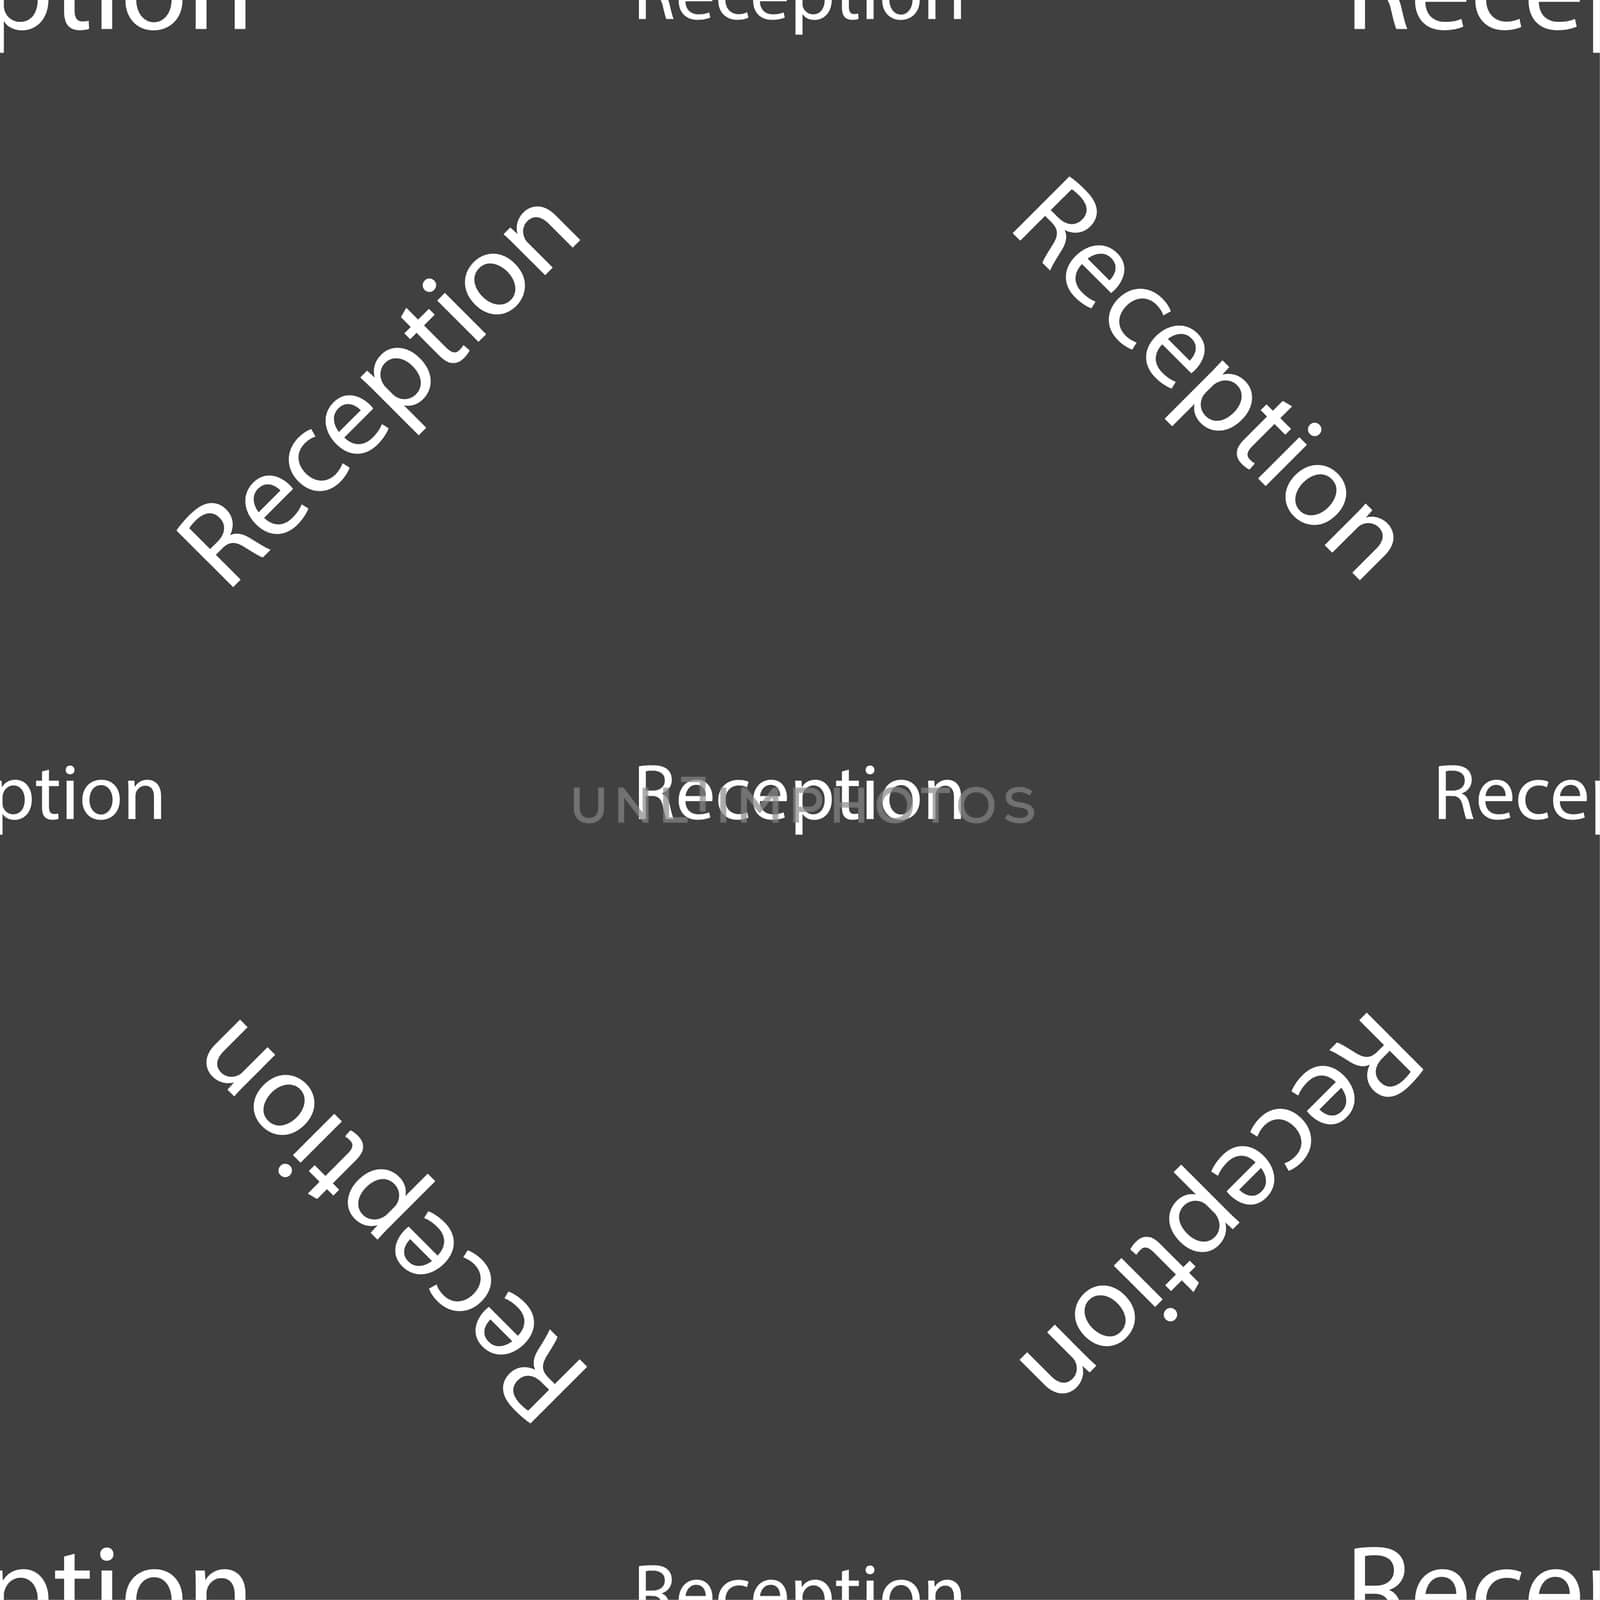 Reception sign icon. Hotel registration table symbol. Seamless pattern on a gray background. illustration